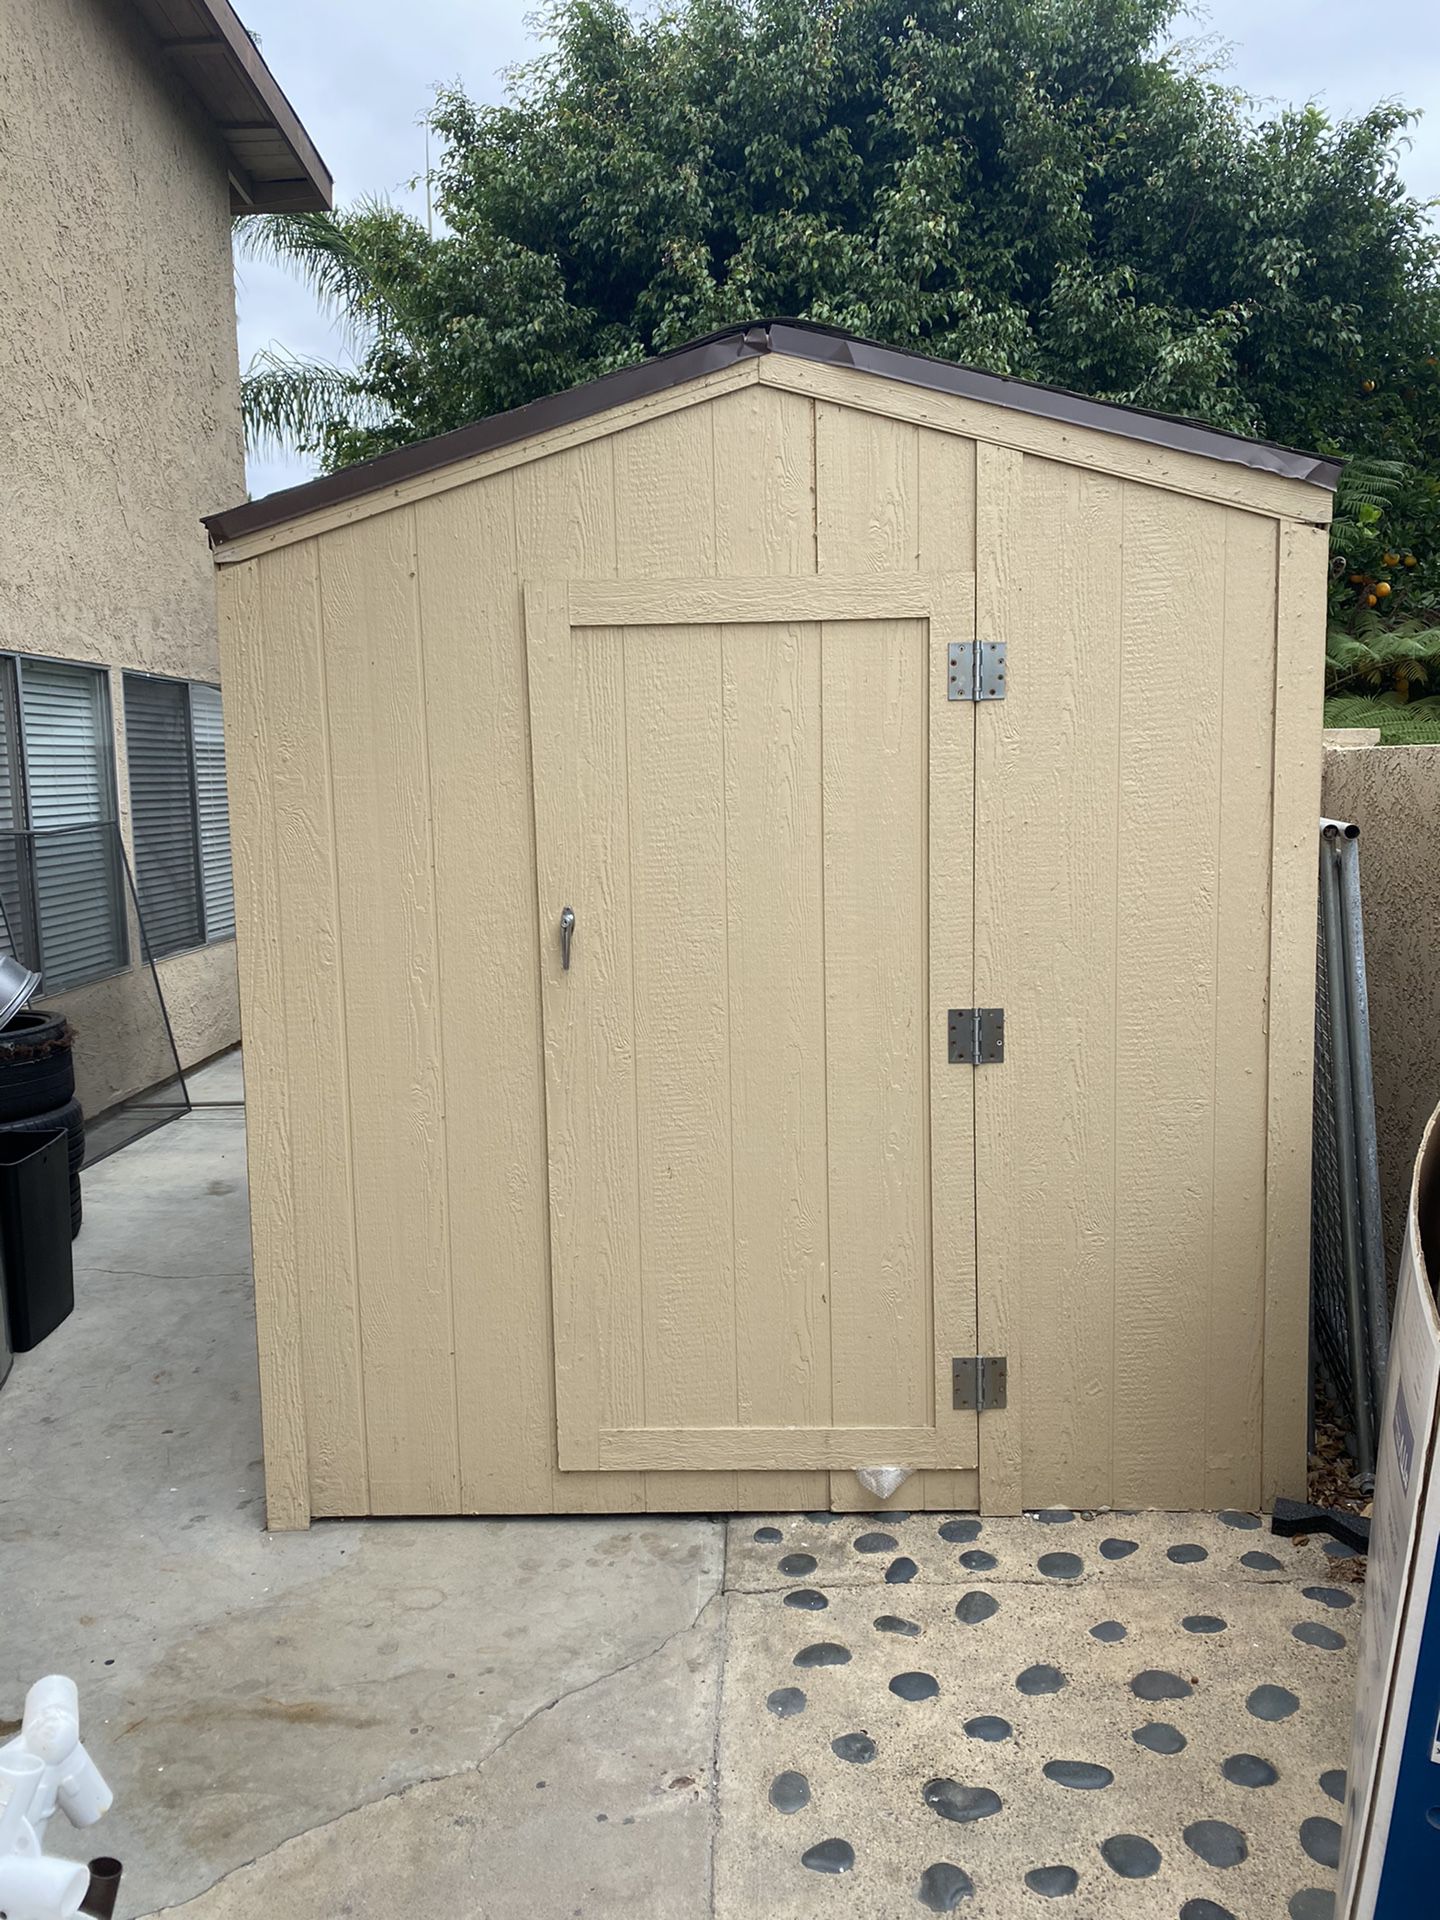 Shed storage container